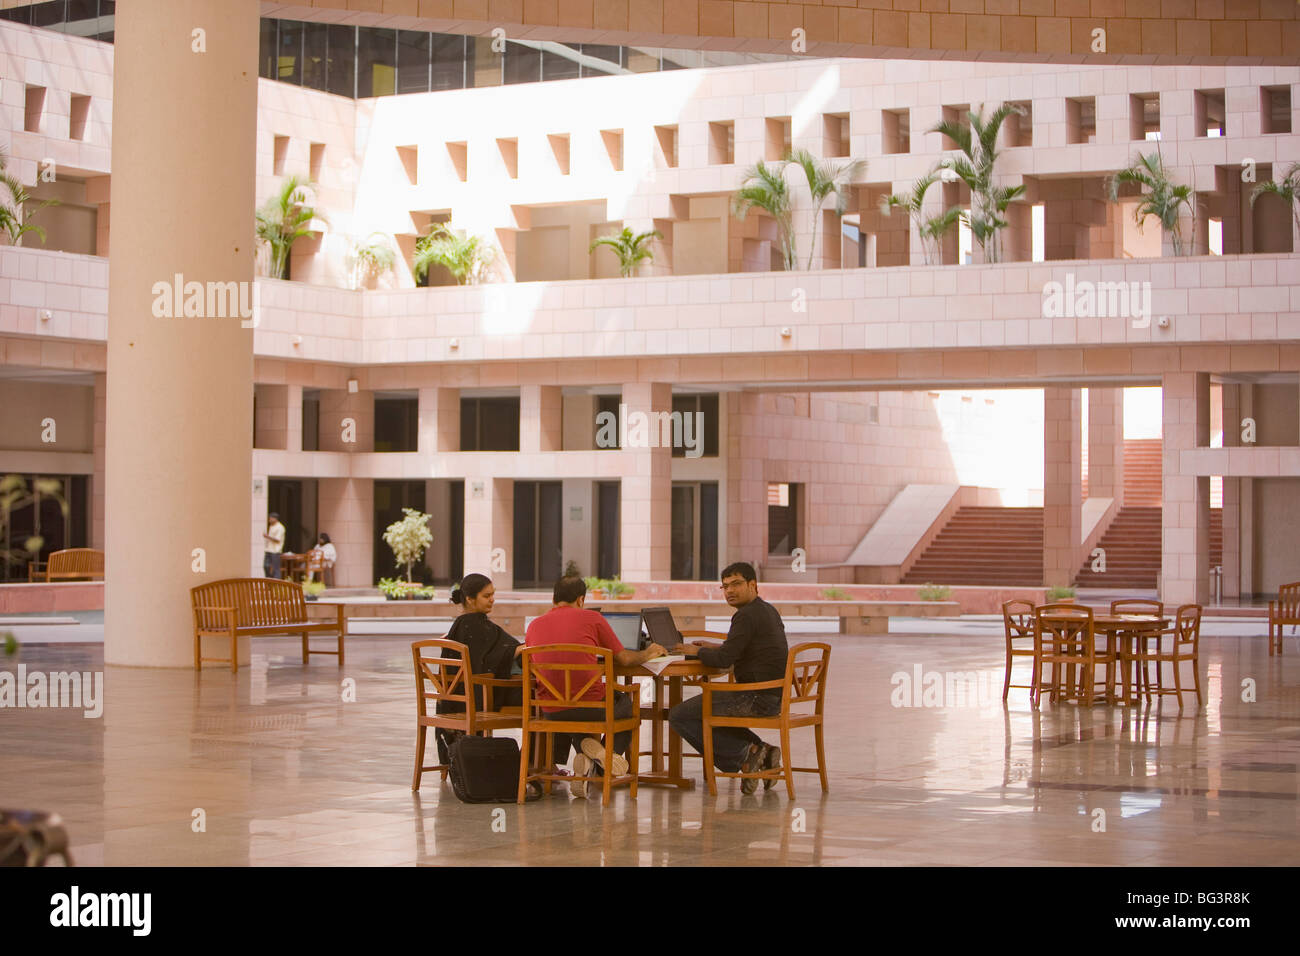 Indian School of Business, Hi-Tech City, Hyderabad, Andhra Pradesh state, India, Asia Stock Photo